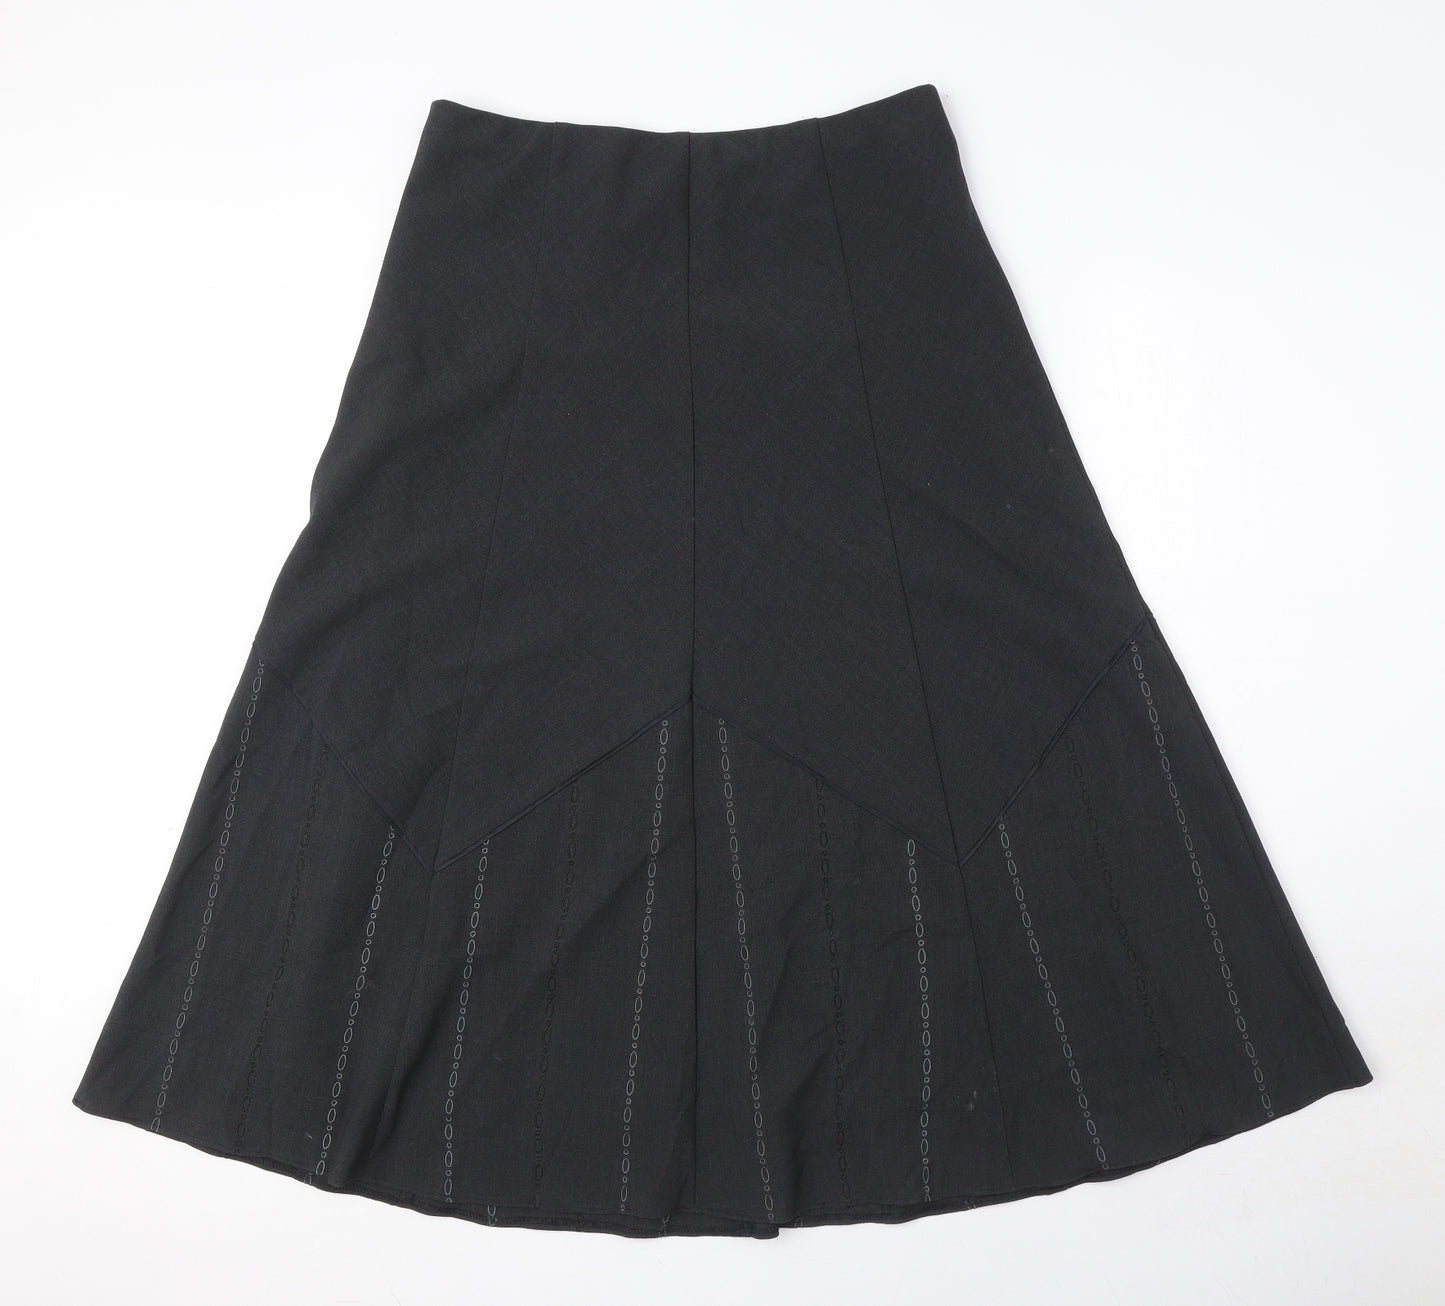 Marks and Spencer Womens Grey Polyester Swing Skirt Size 12